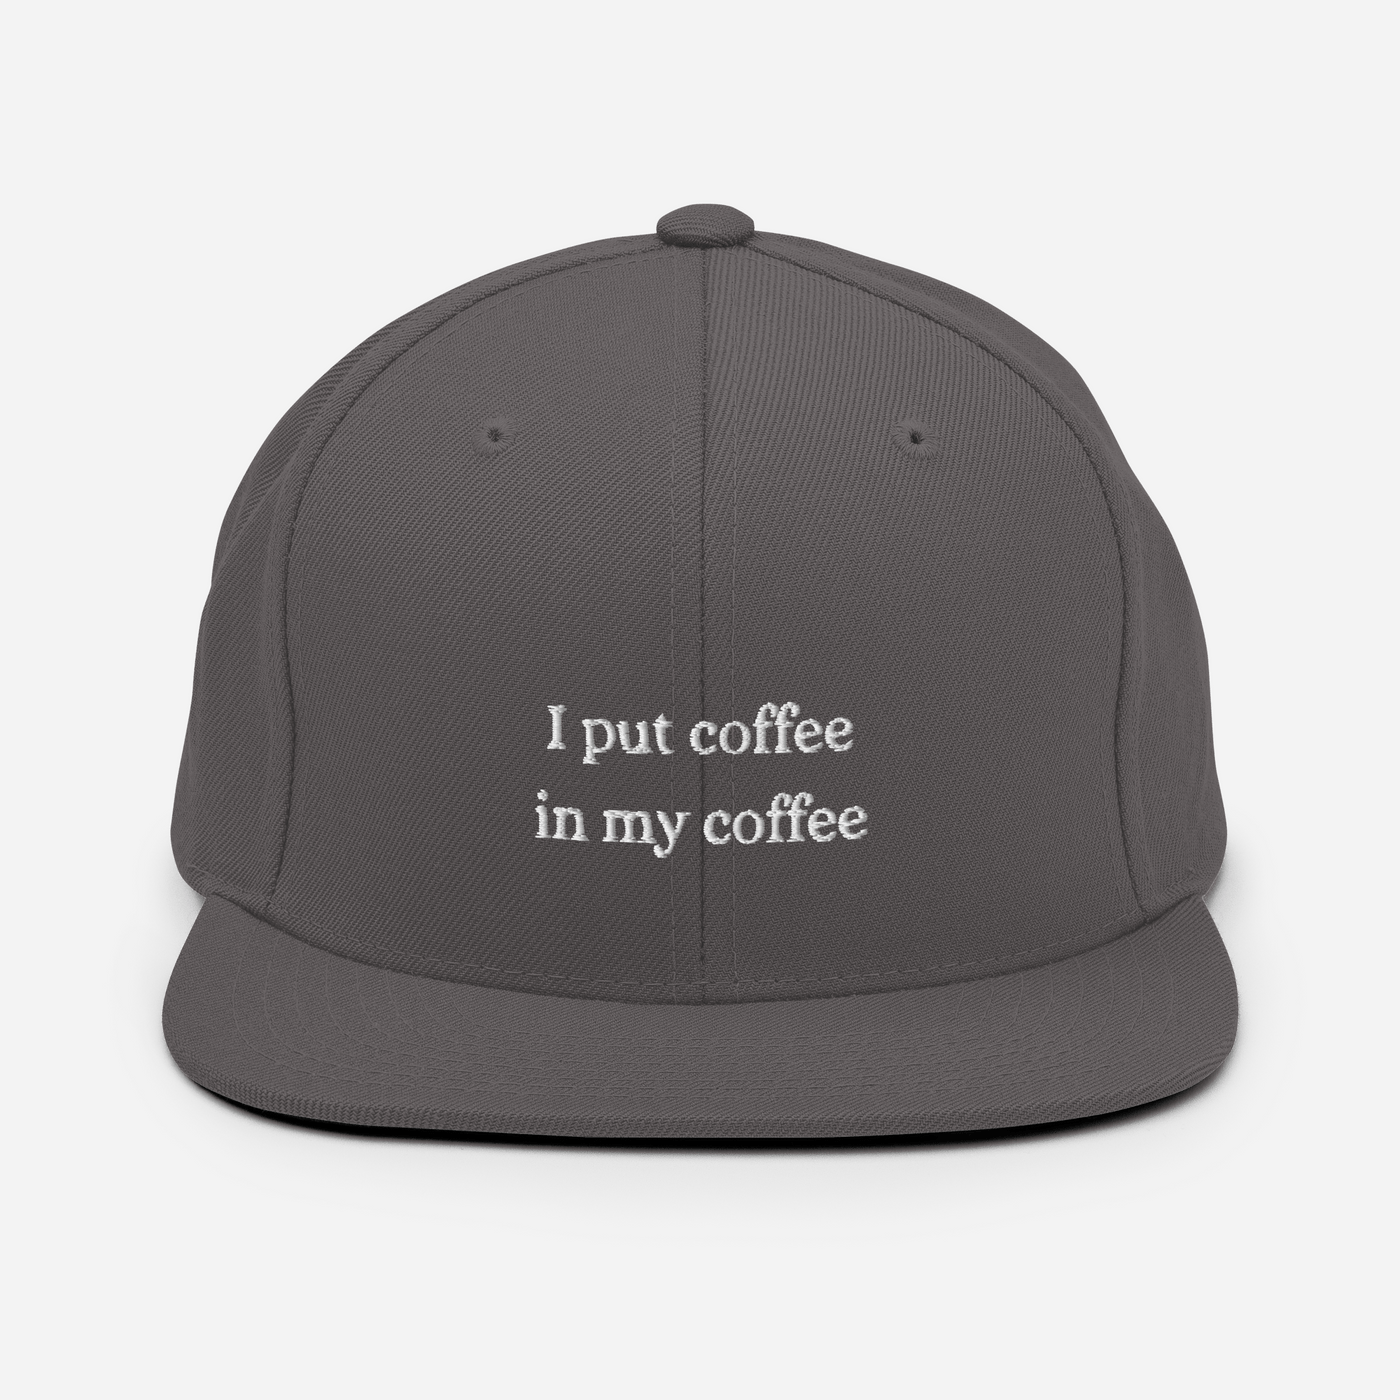 I put coffee in my coffee Snapback Hat - Dark Grey - - Just Another Cap Store